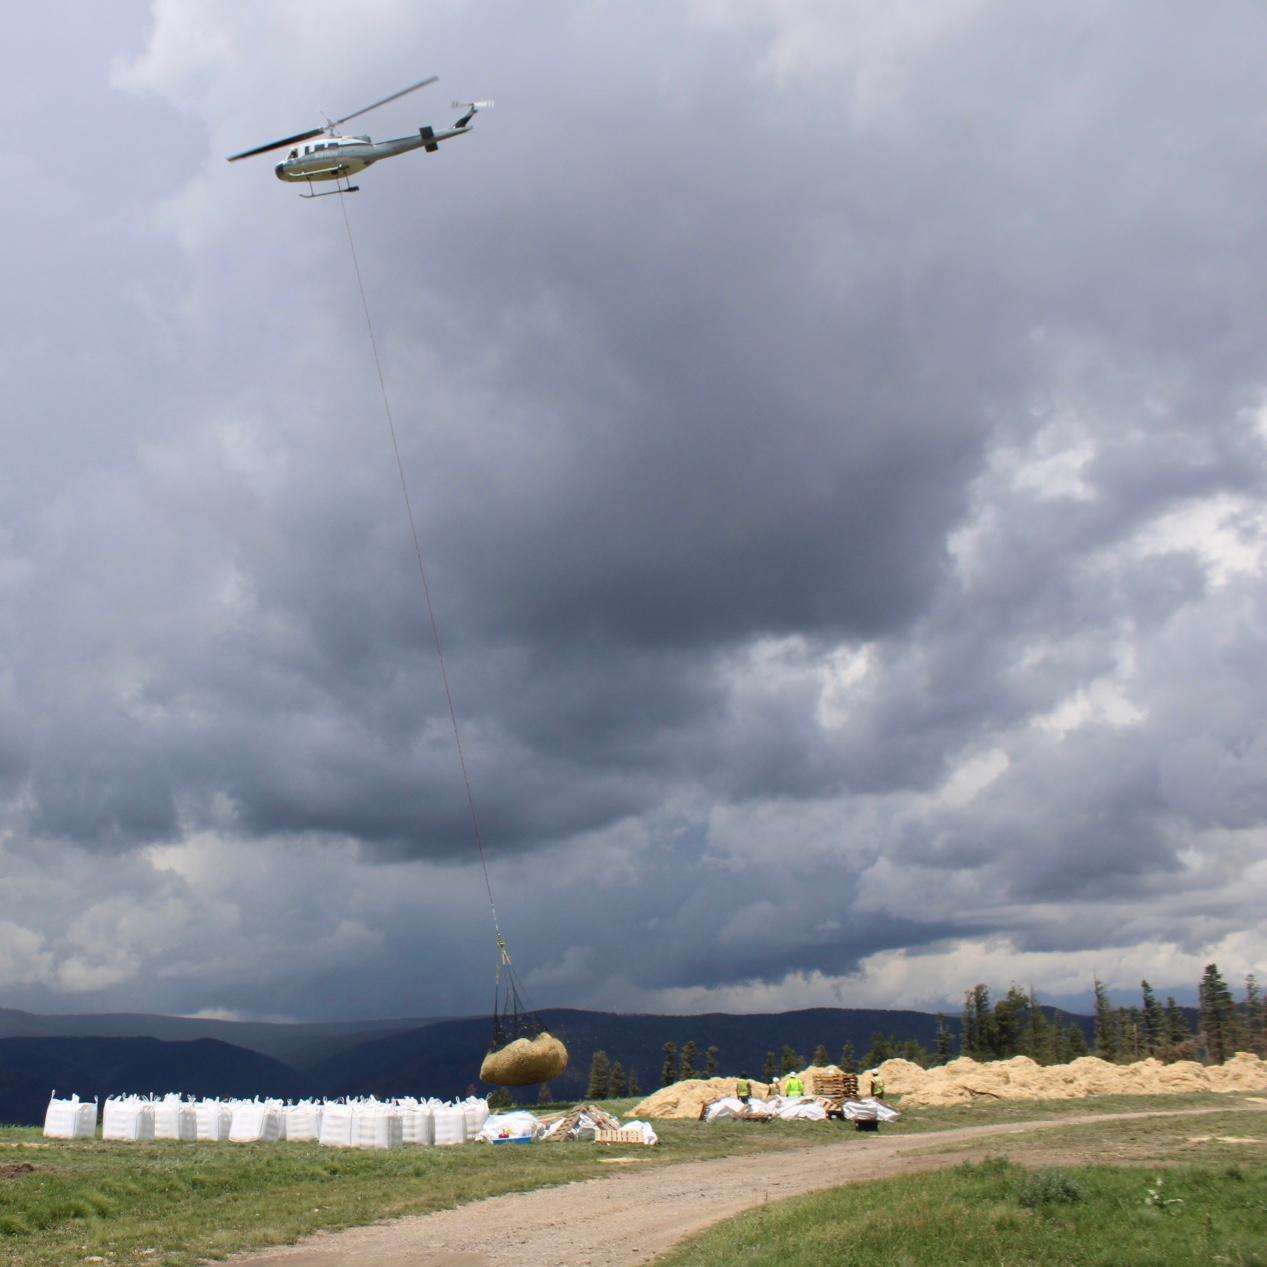 Image of helicopter lifting off with hanging net of straw mulch.